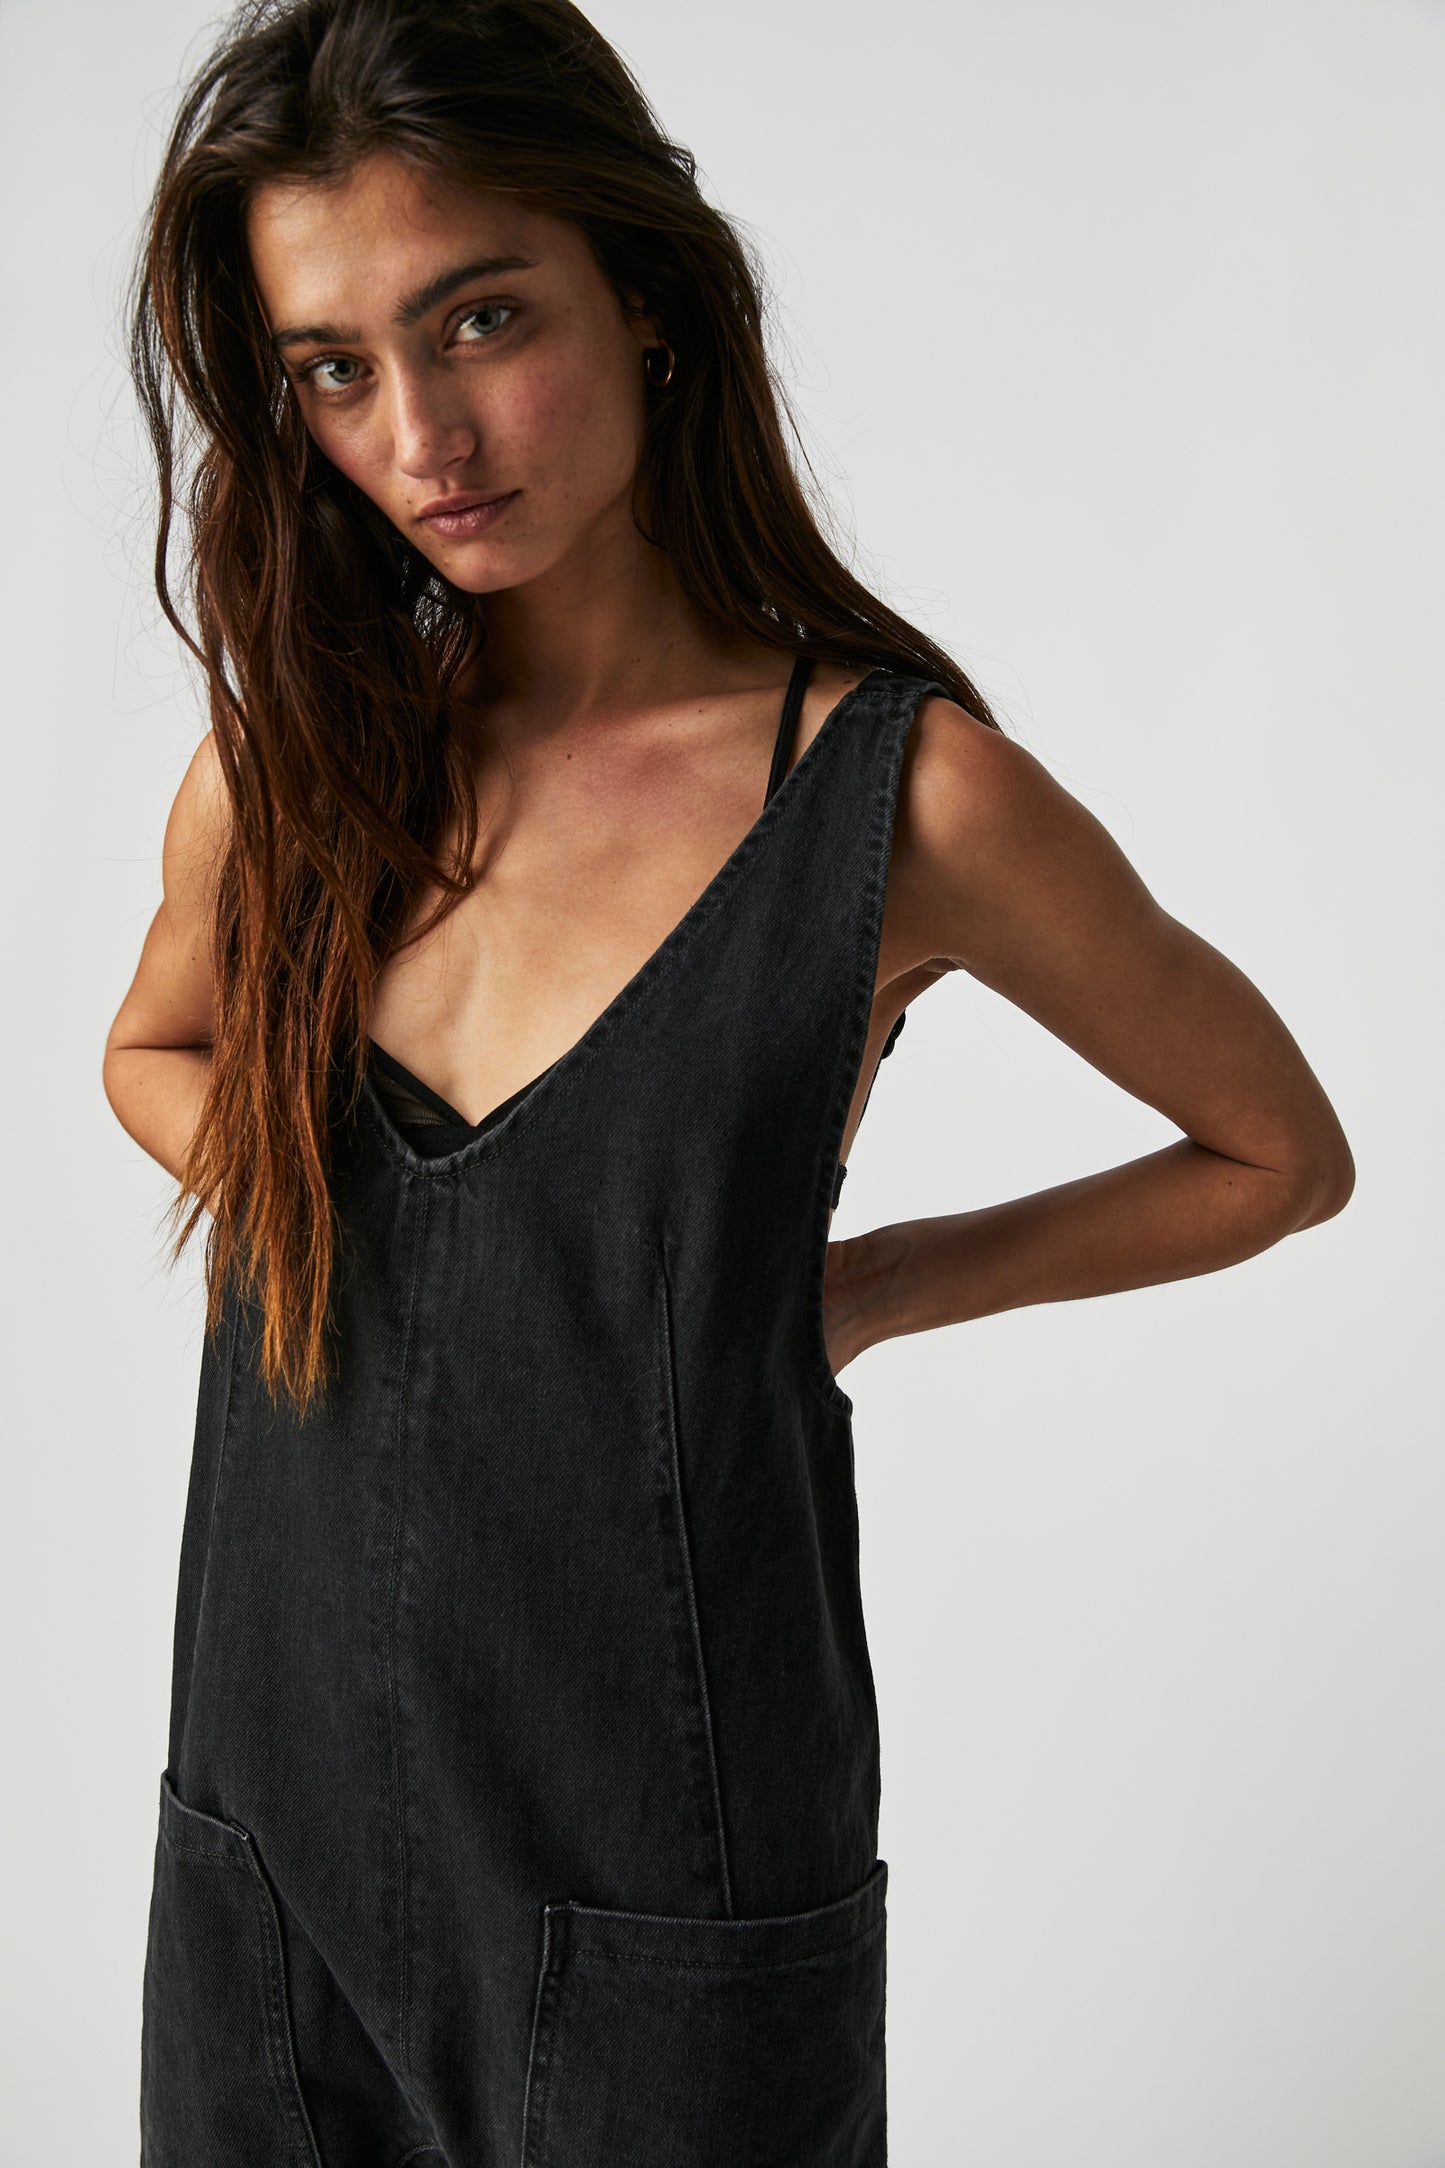 Load image into Gallery viewer, Free People High Roller Jumpsuit - Mineral Black
